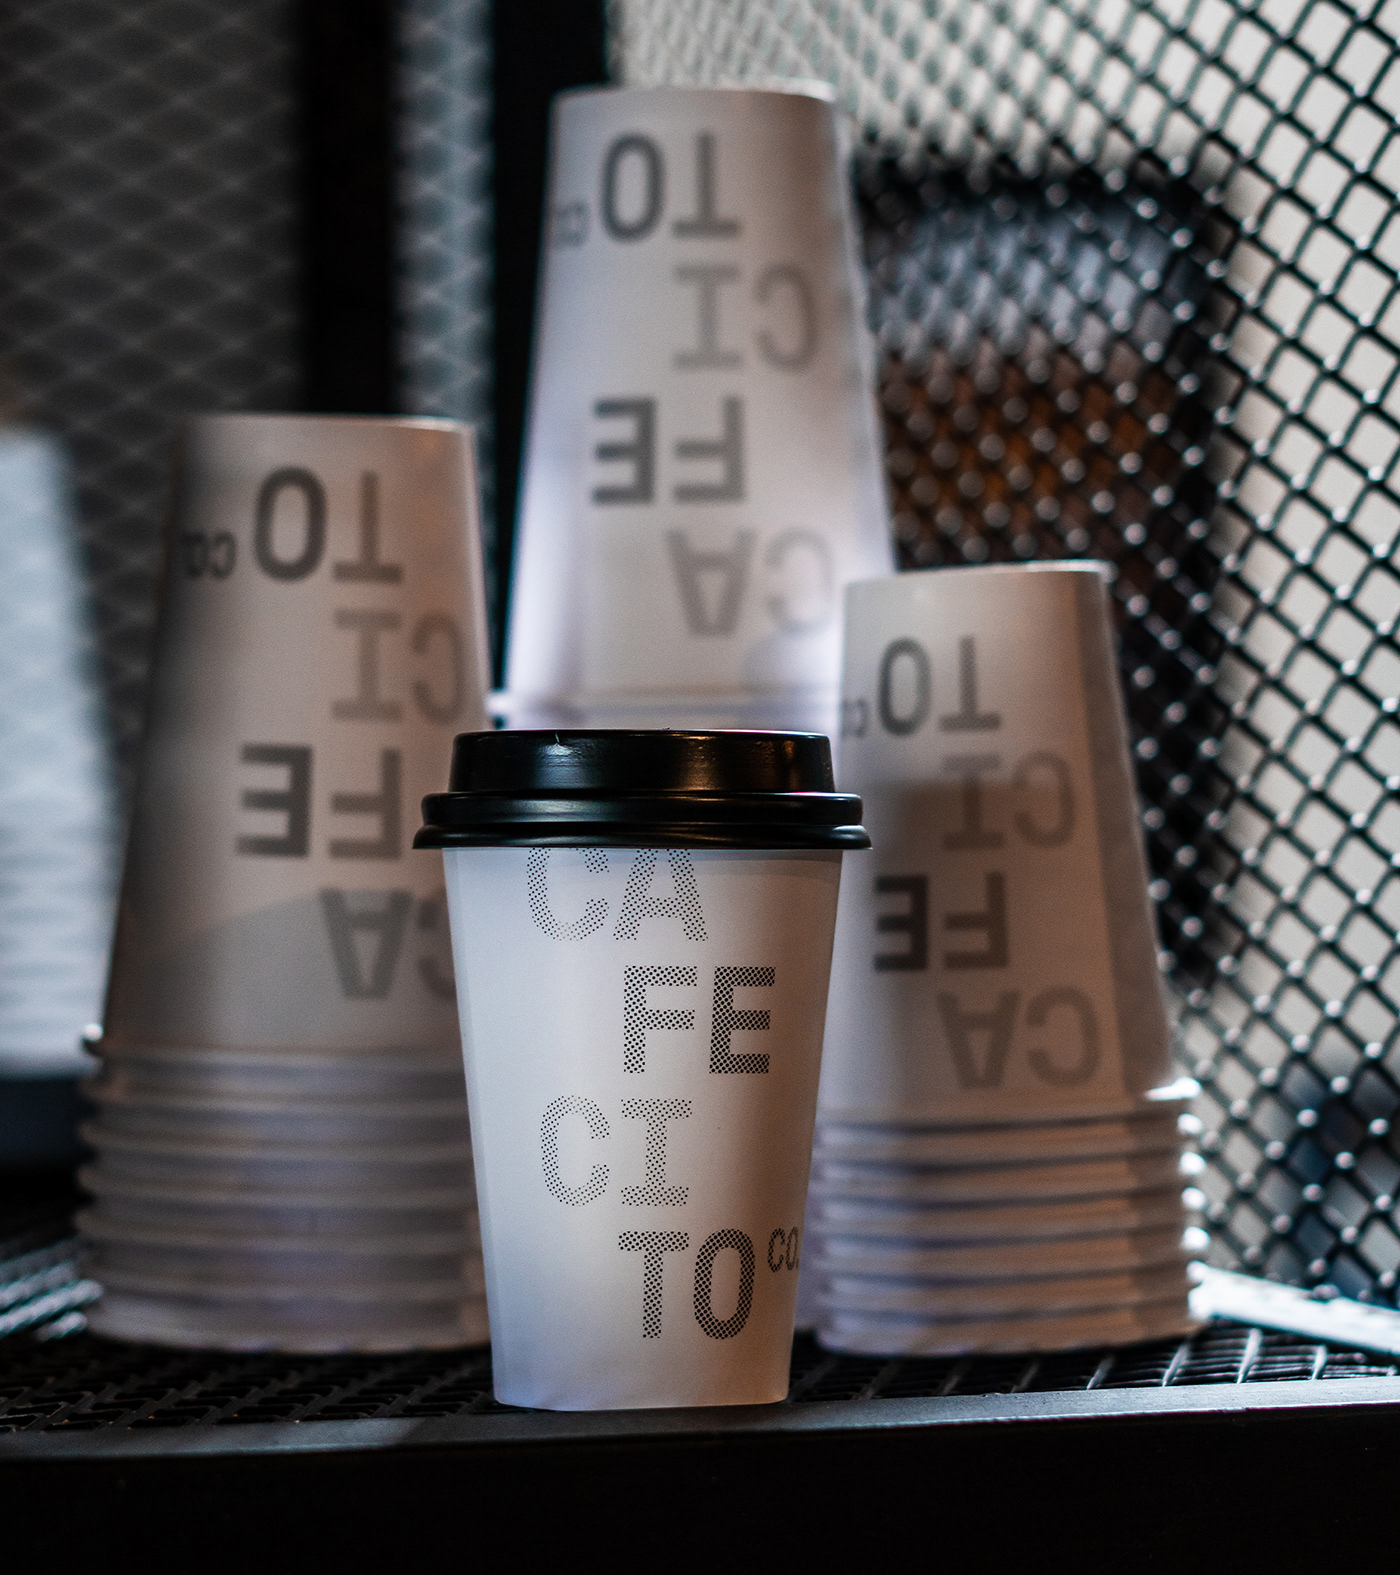 Artifact from the Cafecito Co.: Mastering Branding and Packaging Design article on Abduzeedo